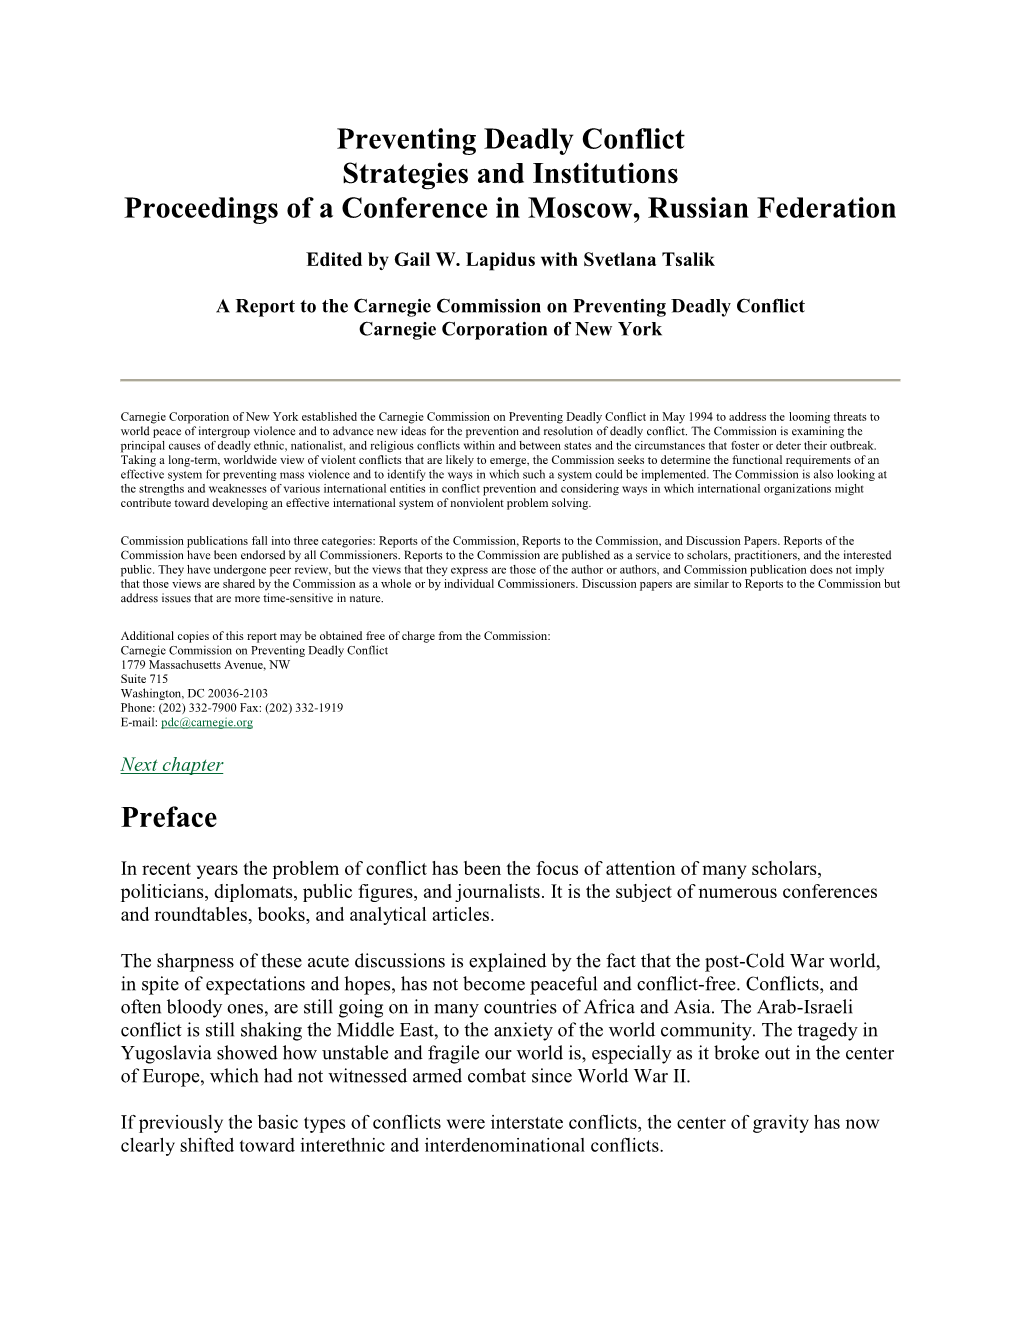 Preventing Deadly Conflict Strategies and Institutions Proceedings of a Conference in Moscow, Russian Federation Preface